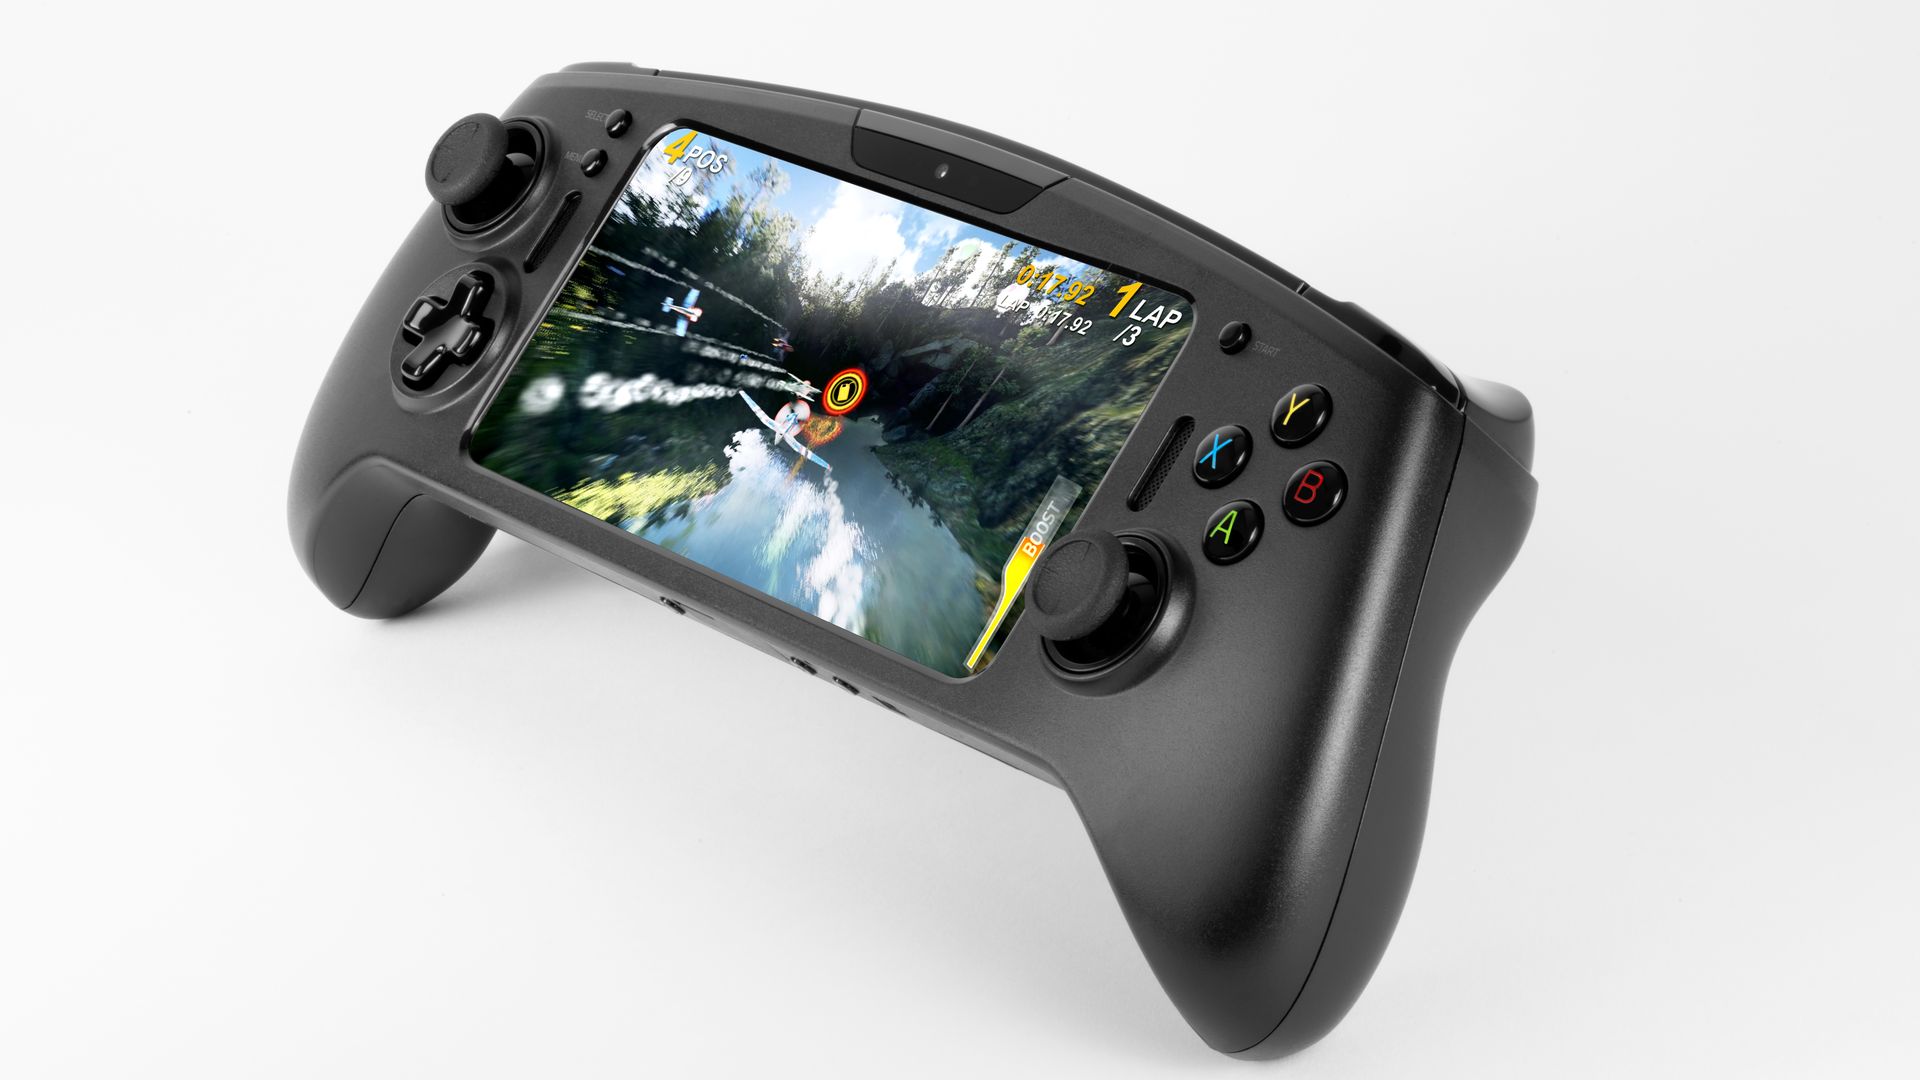 Image a Switch-like handheld gaming device